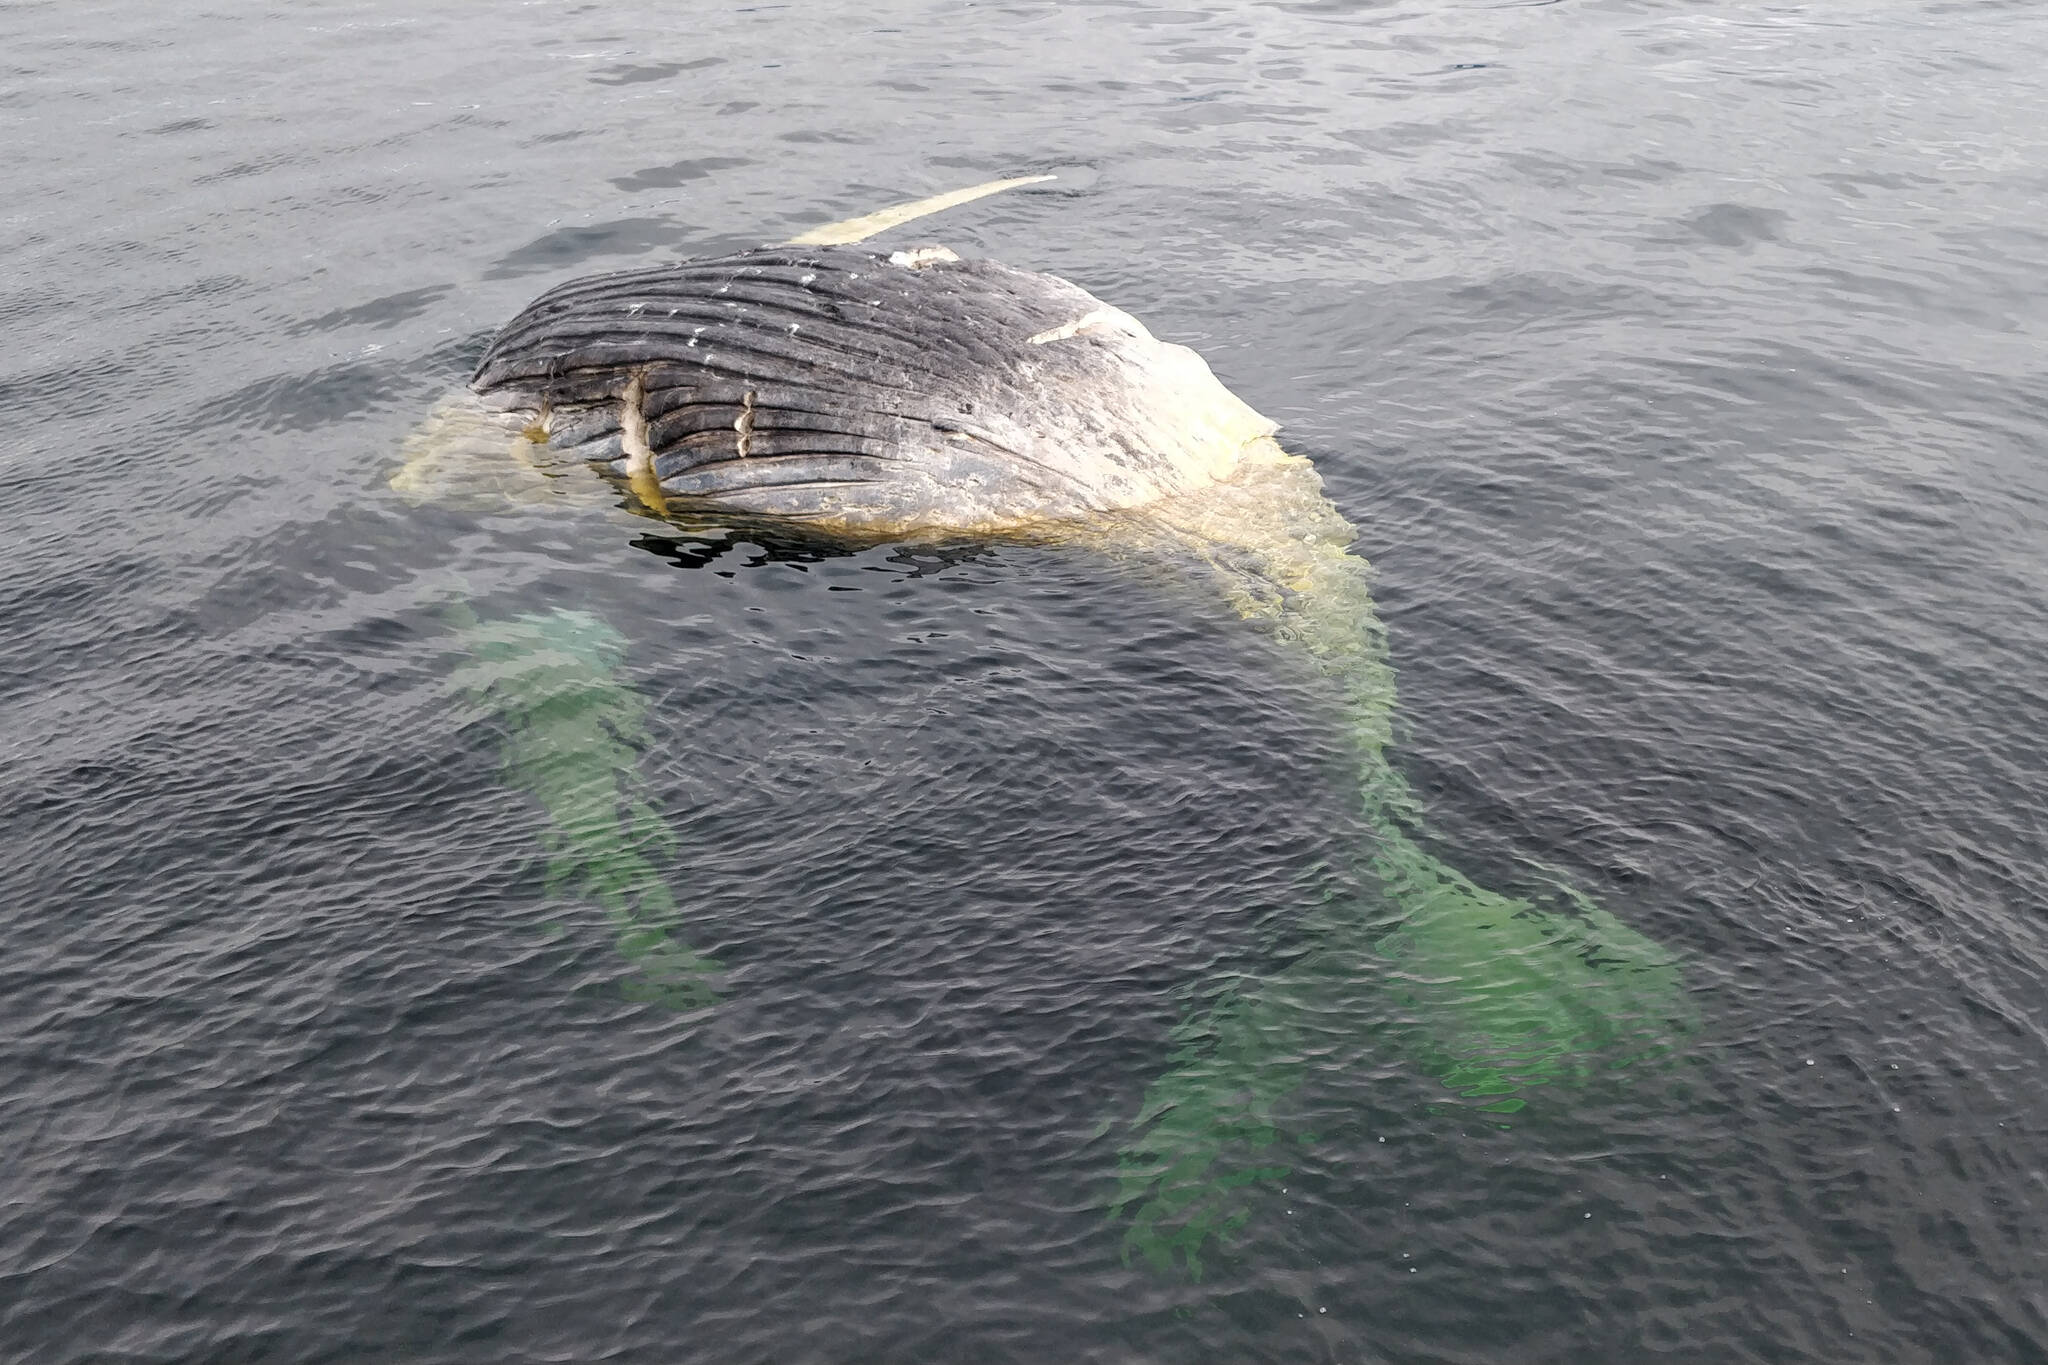 A dead whale previously seen and necropsied on a small island near Angoon was spotted afloat on March 3. The cuts visible come from the necropsy effort, said a NOAA official. (Larry Talley / Courtesy photo)